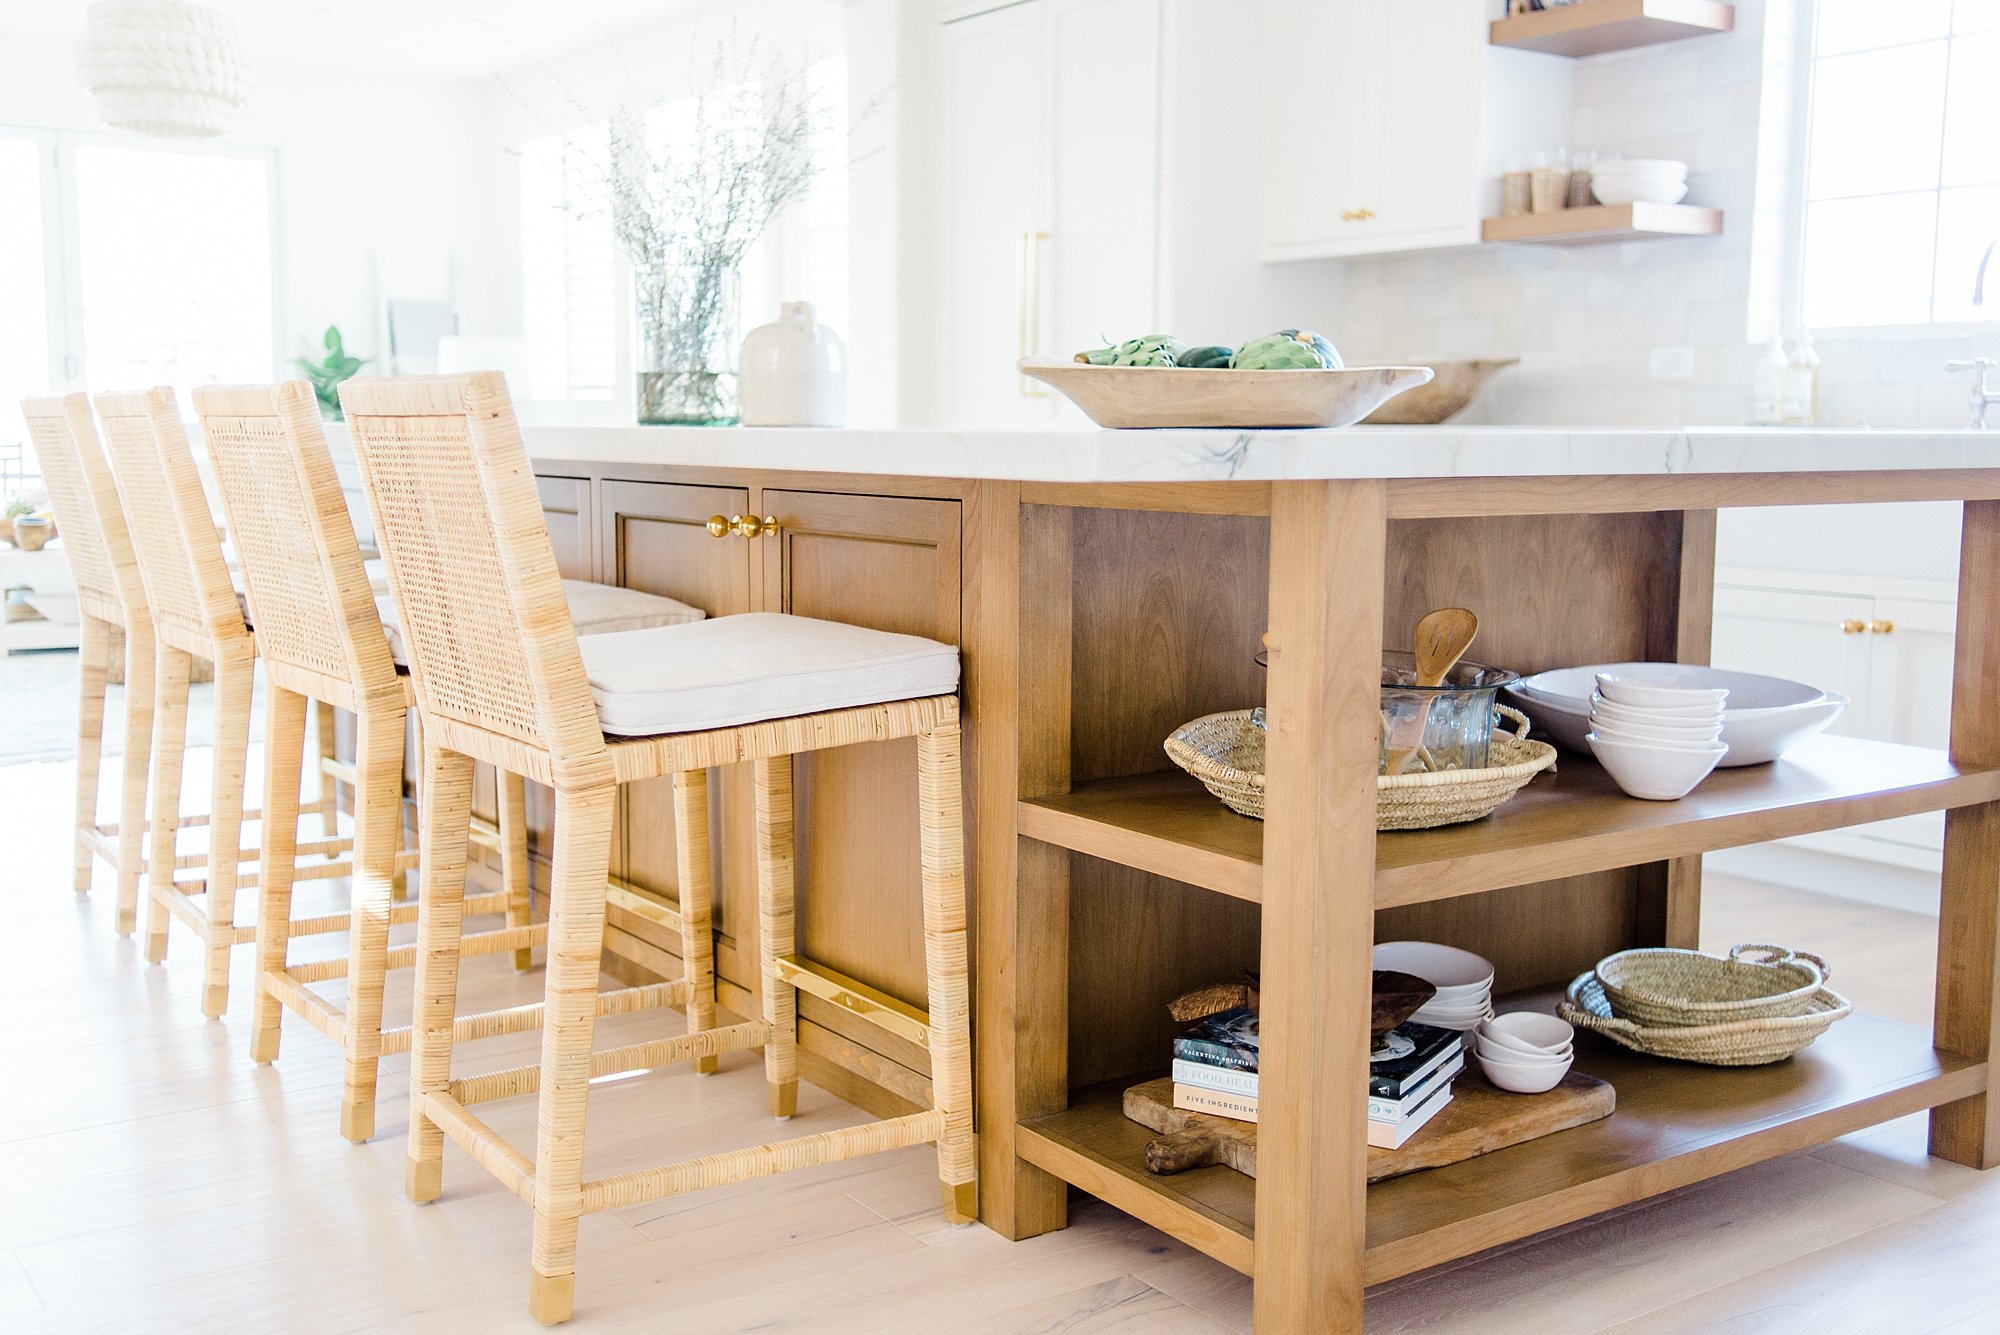  Kitchen Island in natural wood elements creating a warm and welcoming kitchen  